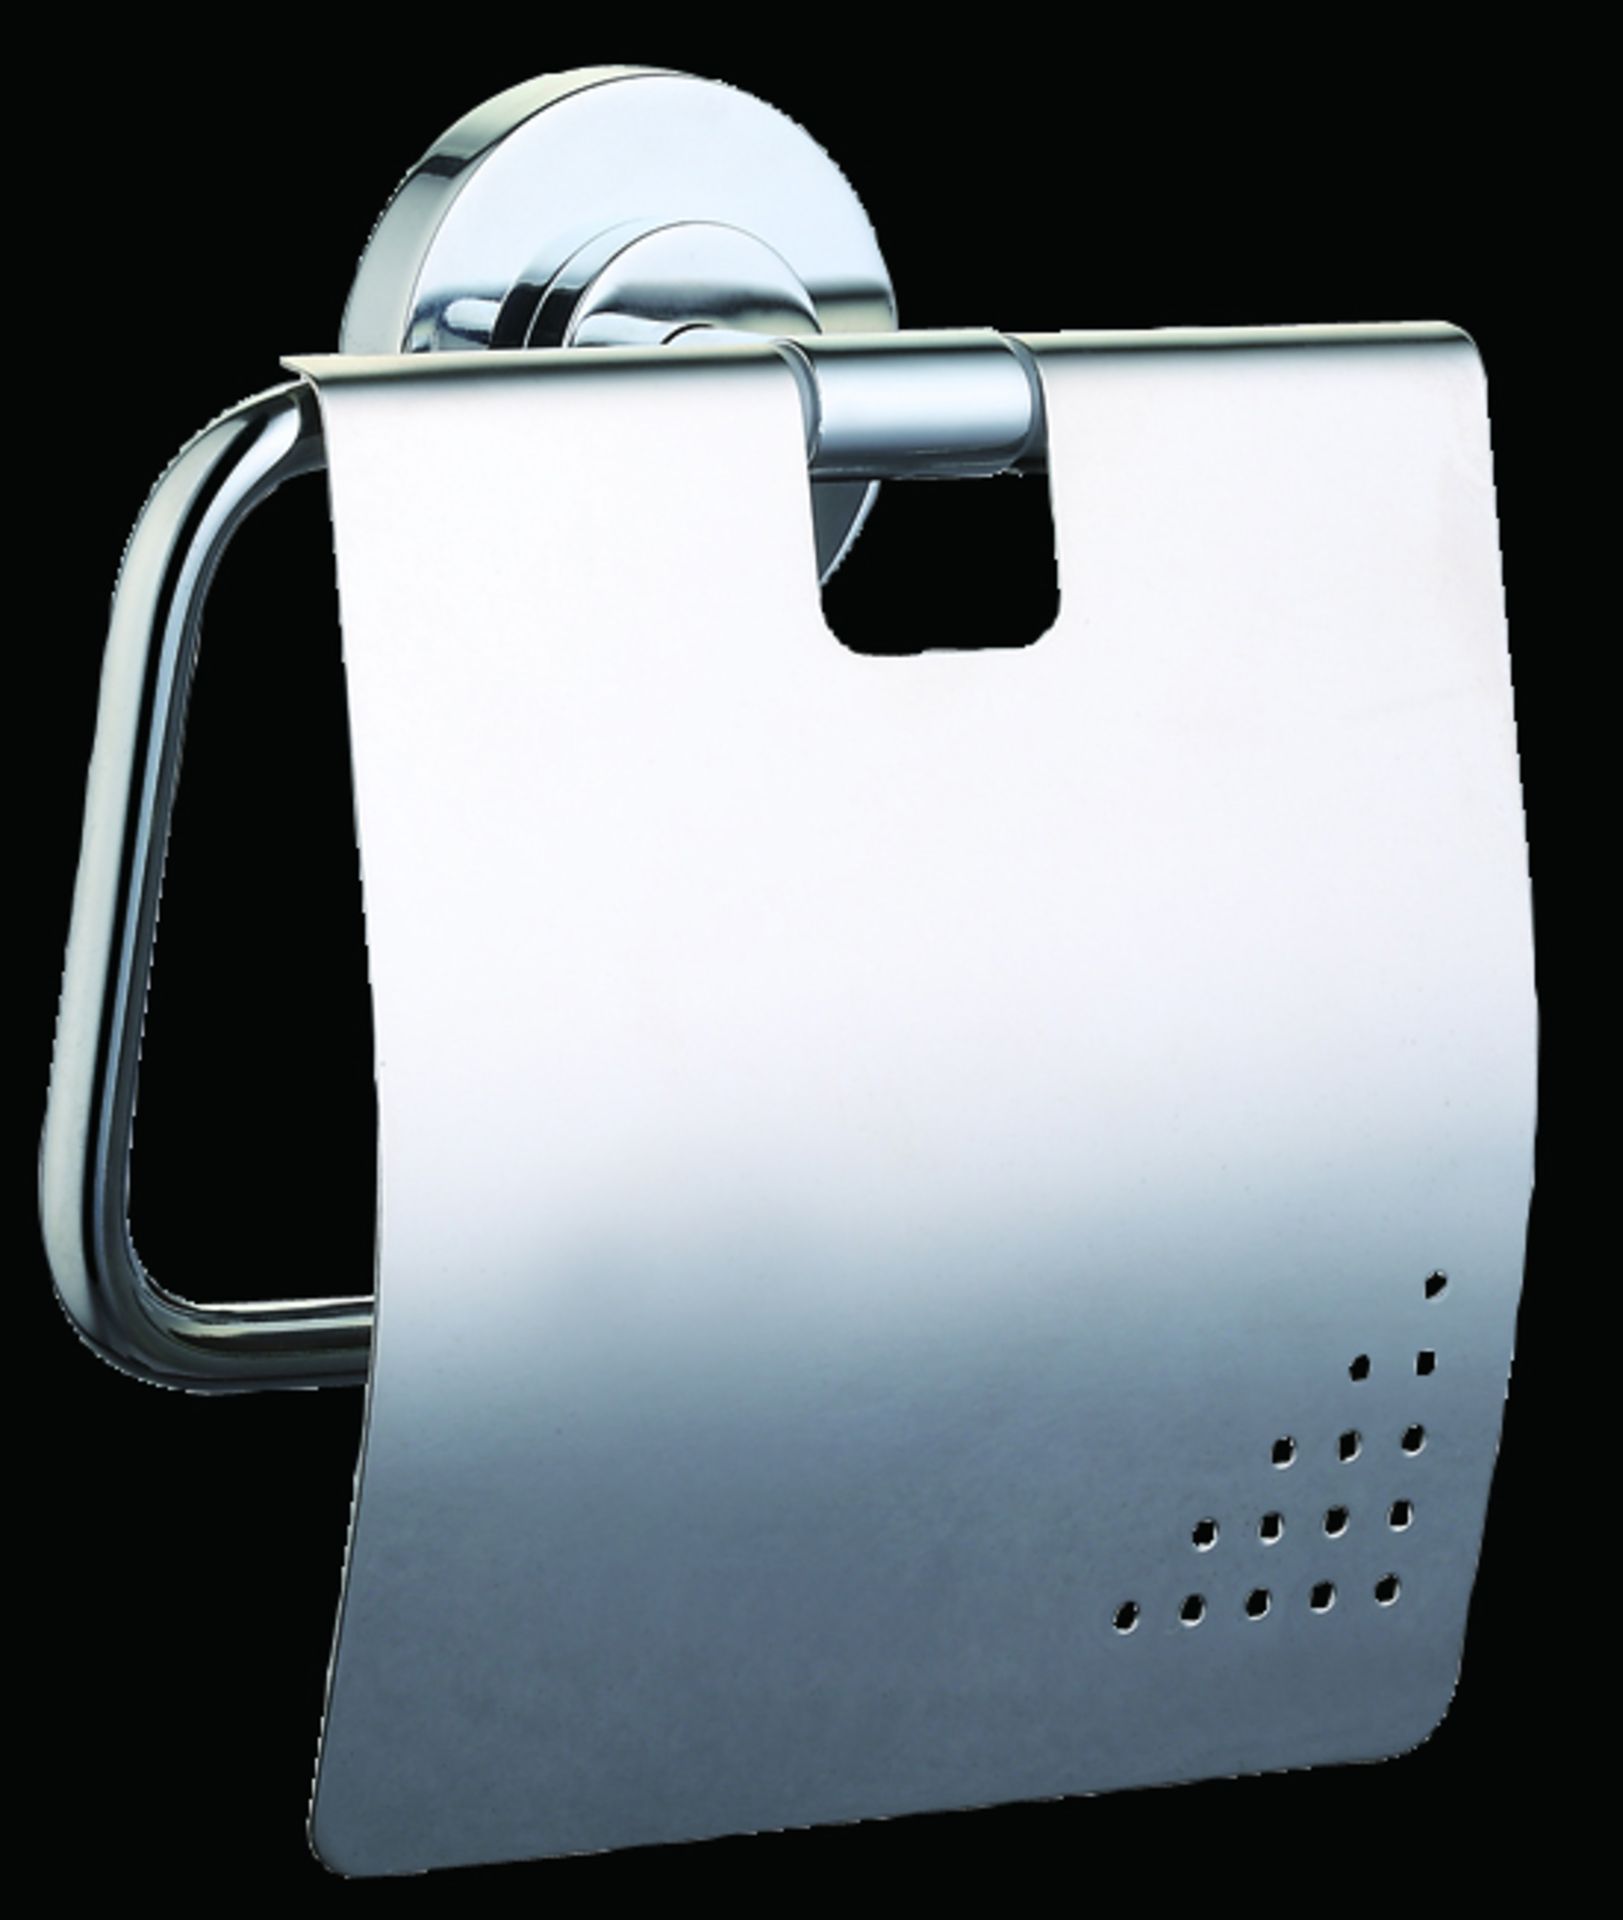 1 x Vogue Series 5 Six Piece Bathroom Accessory Set - Includes WC Roll Holder, Soap Dispenser, - Image 6 of 7